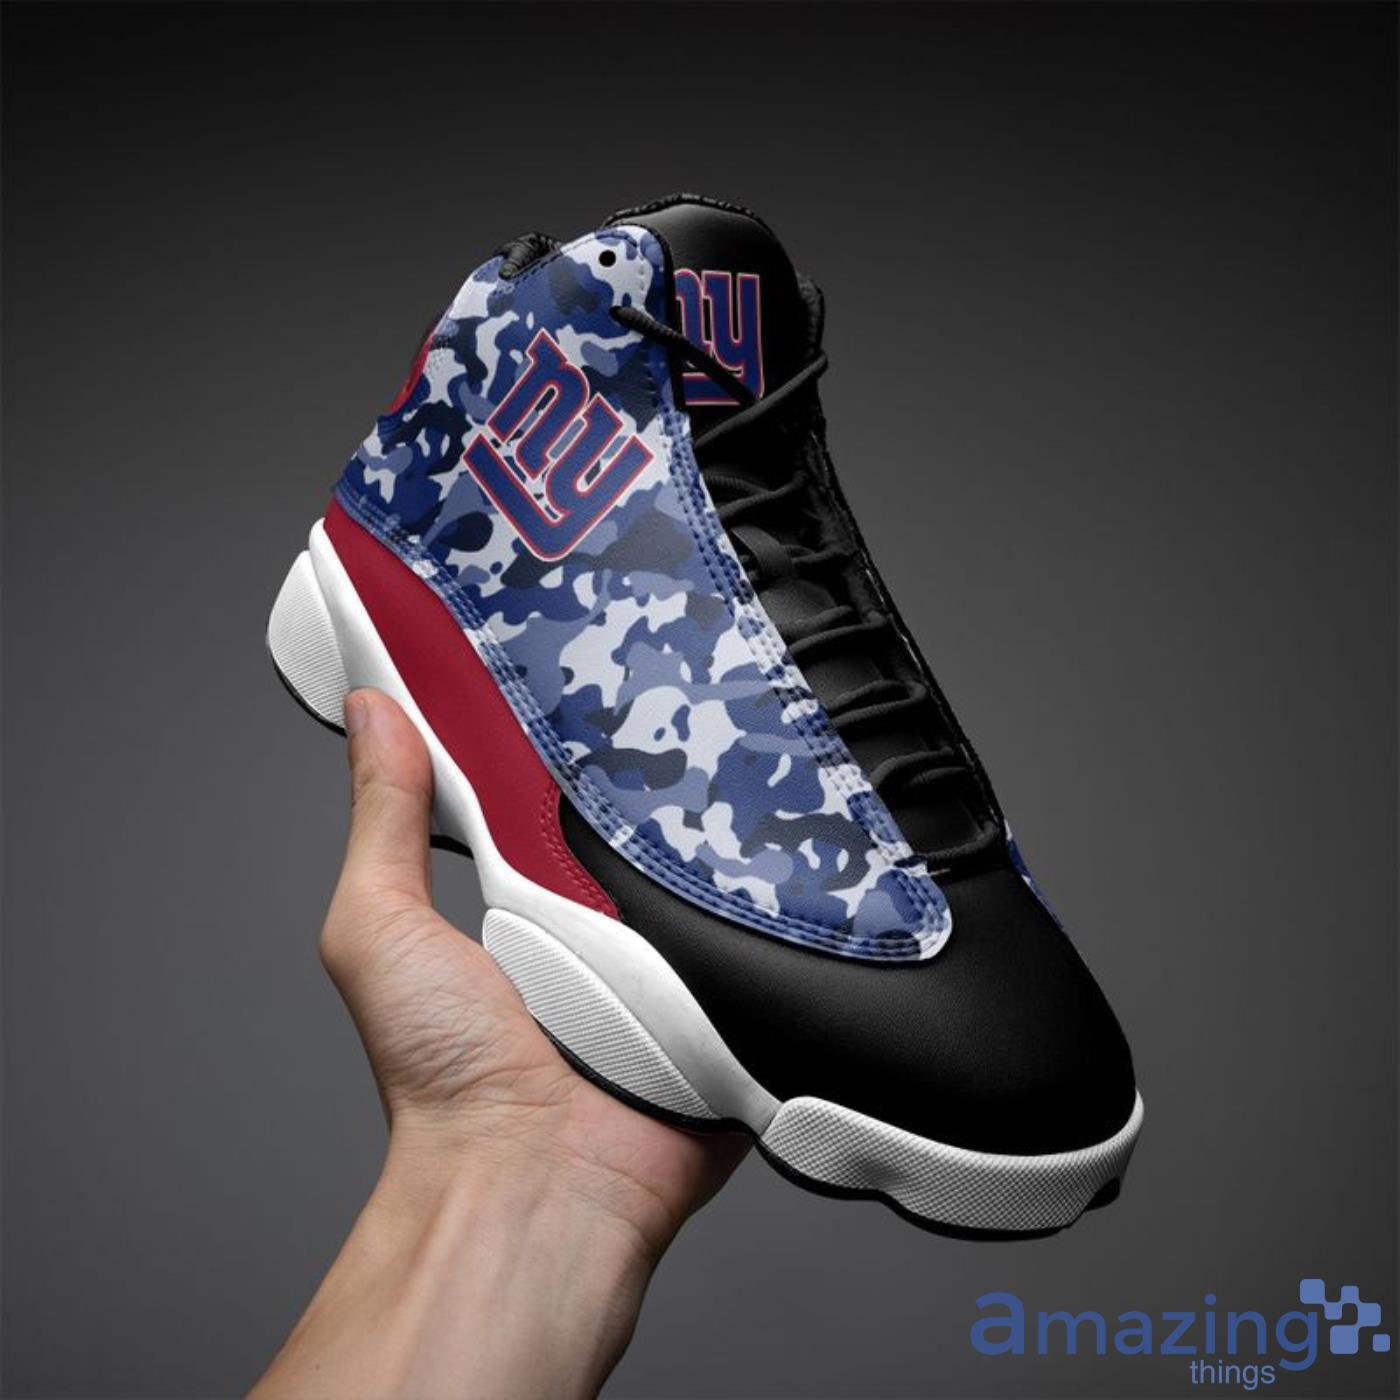 New York Giants Limited Edition Air Jordan 13 Sneakers Shoes For Fans -  Banantees